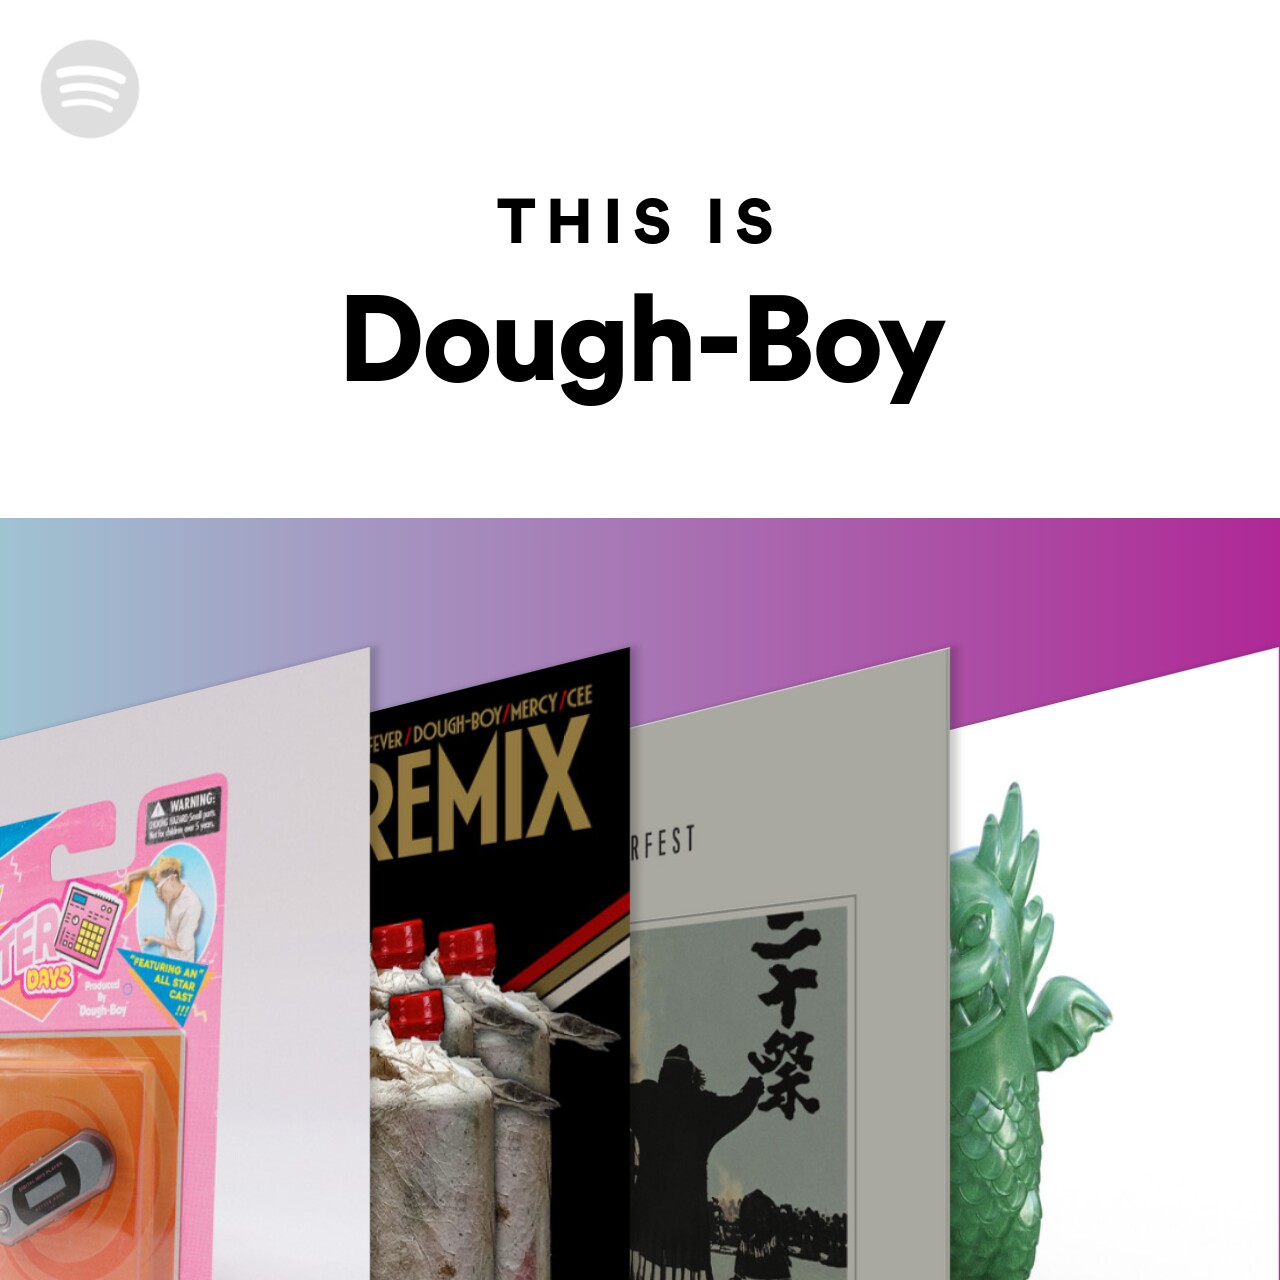 This Is Dough-Boy